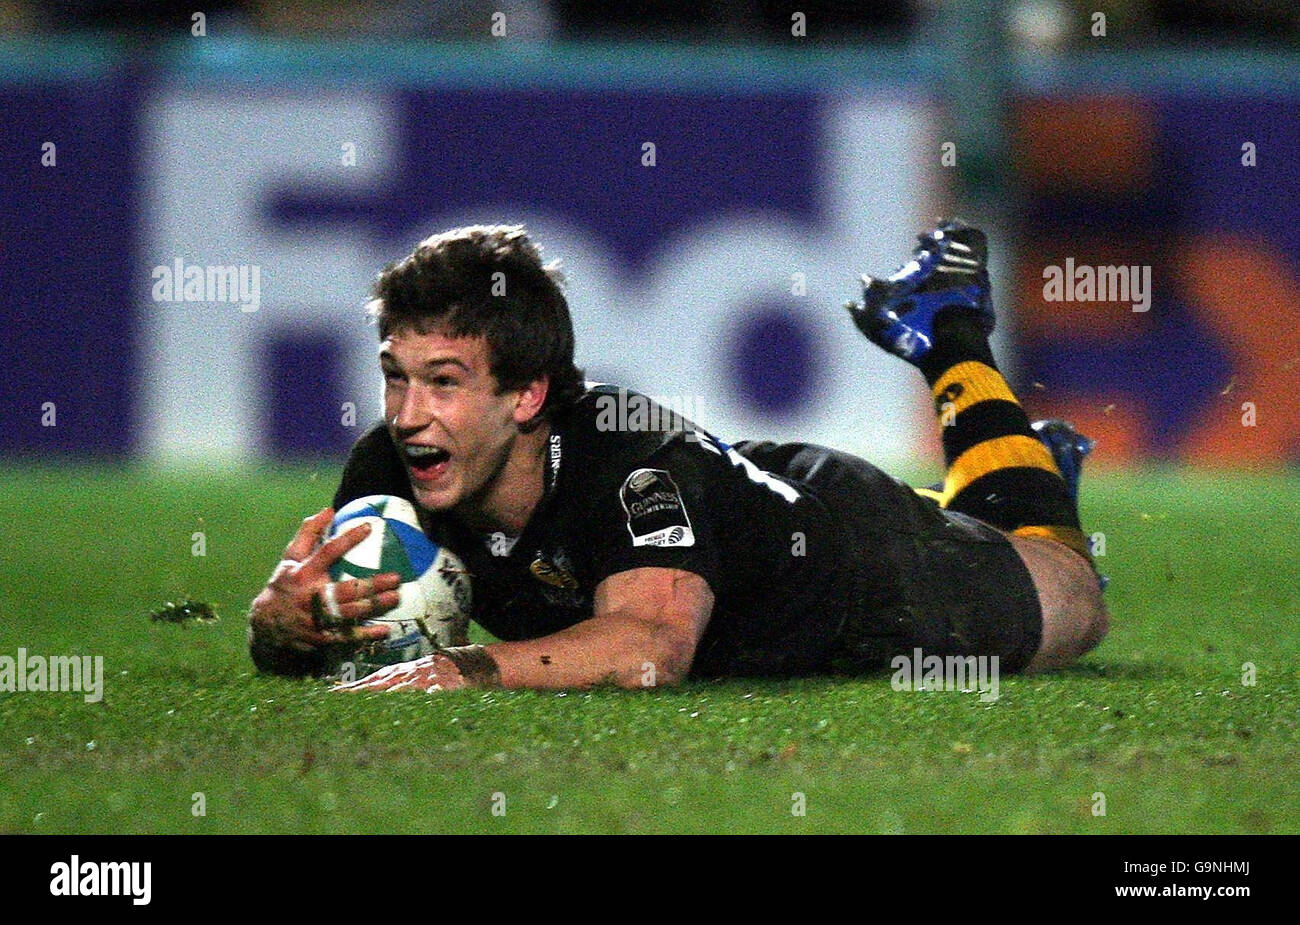 Dominic Waldouck slides in Wasps opening try during the Heineken Cup Pool One match at Causeway Stadium, Wycombe. Stock Photo